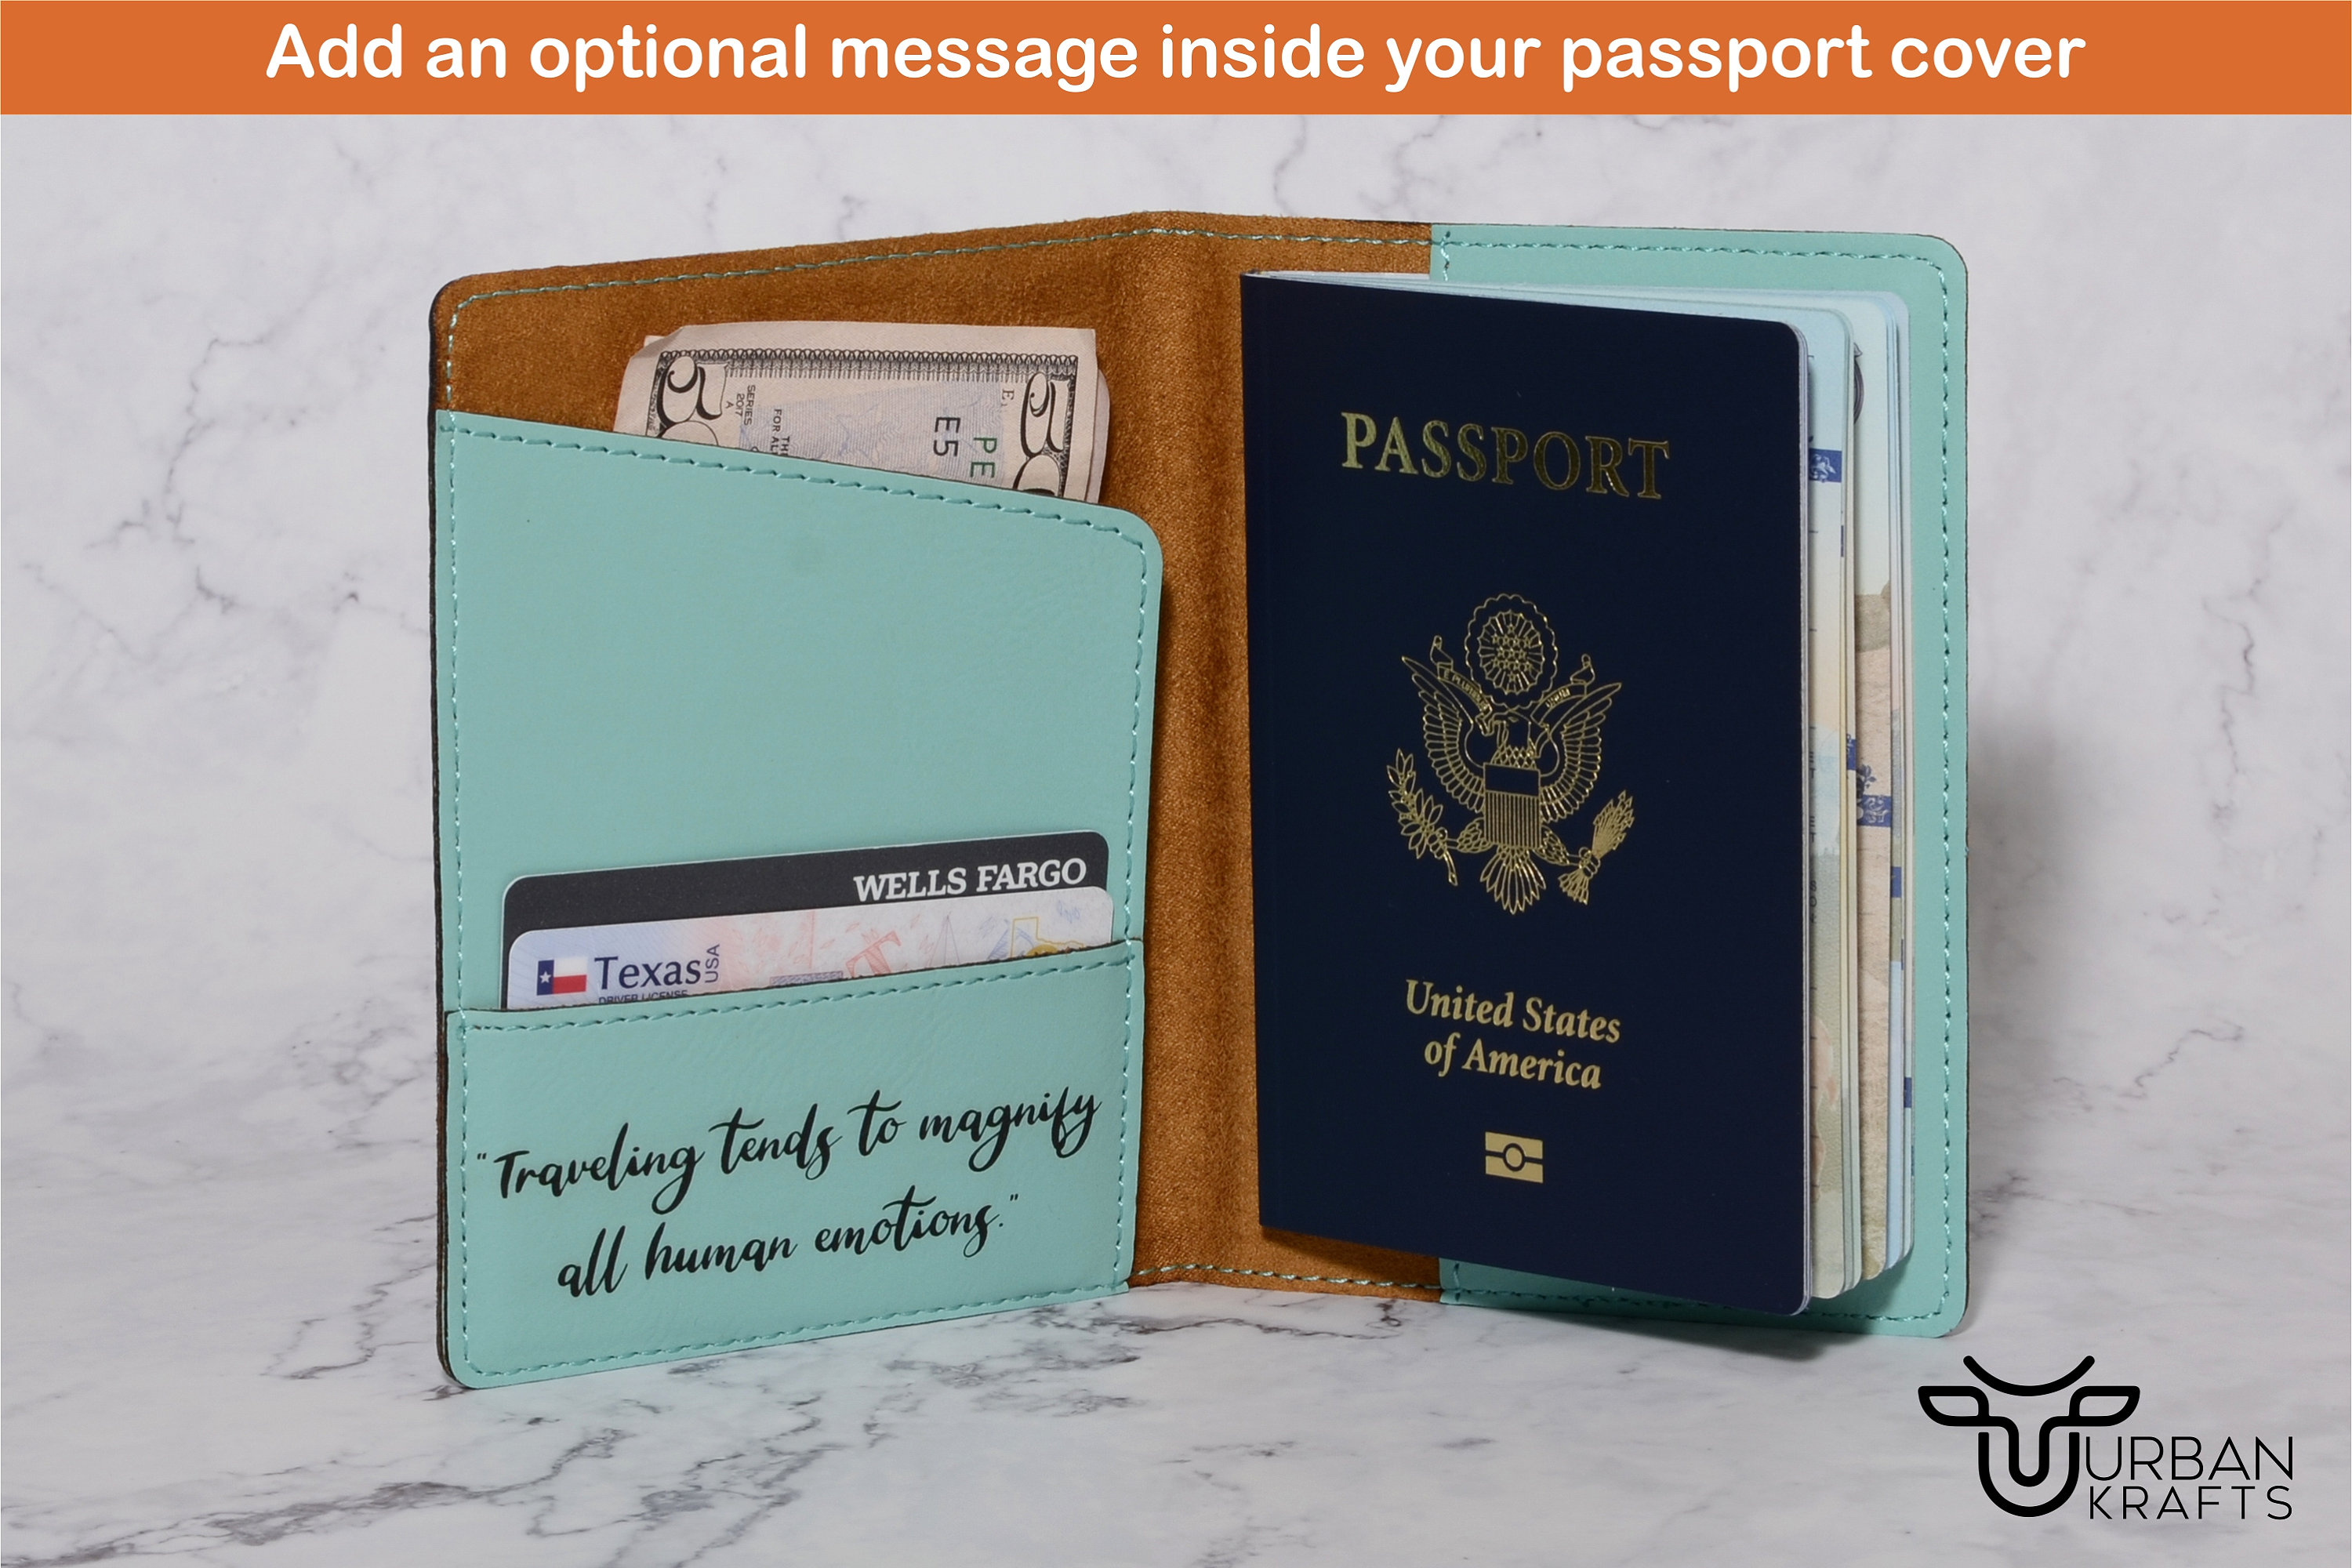 Personalized Leatherette Passport Cover and Cards Holder | Custom Engraved with